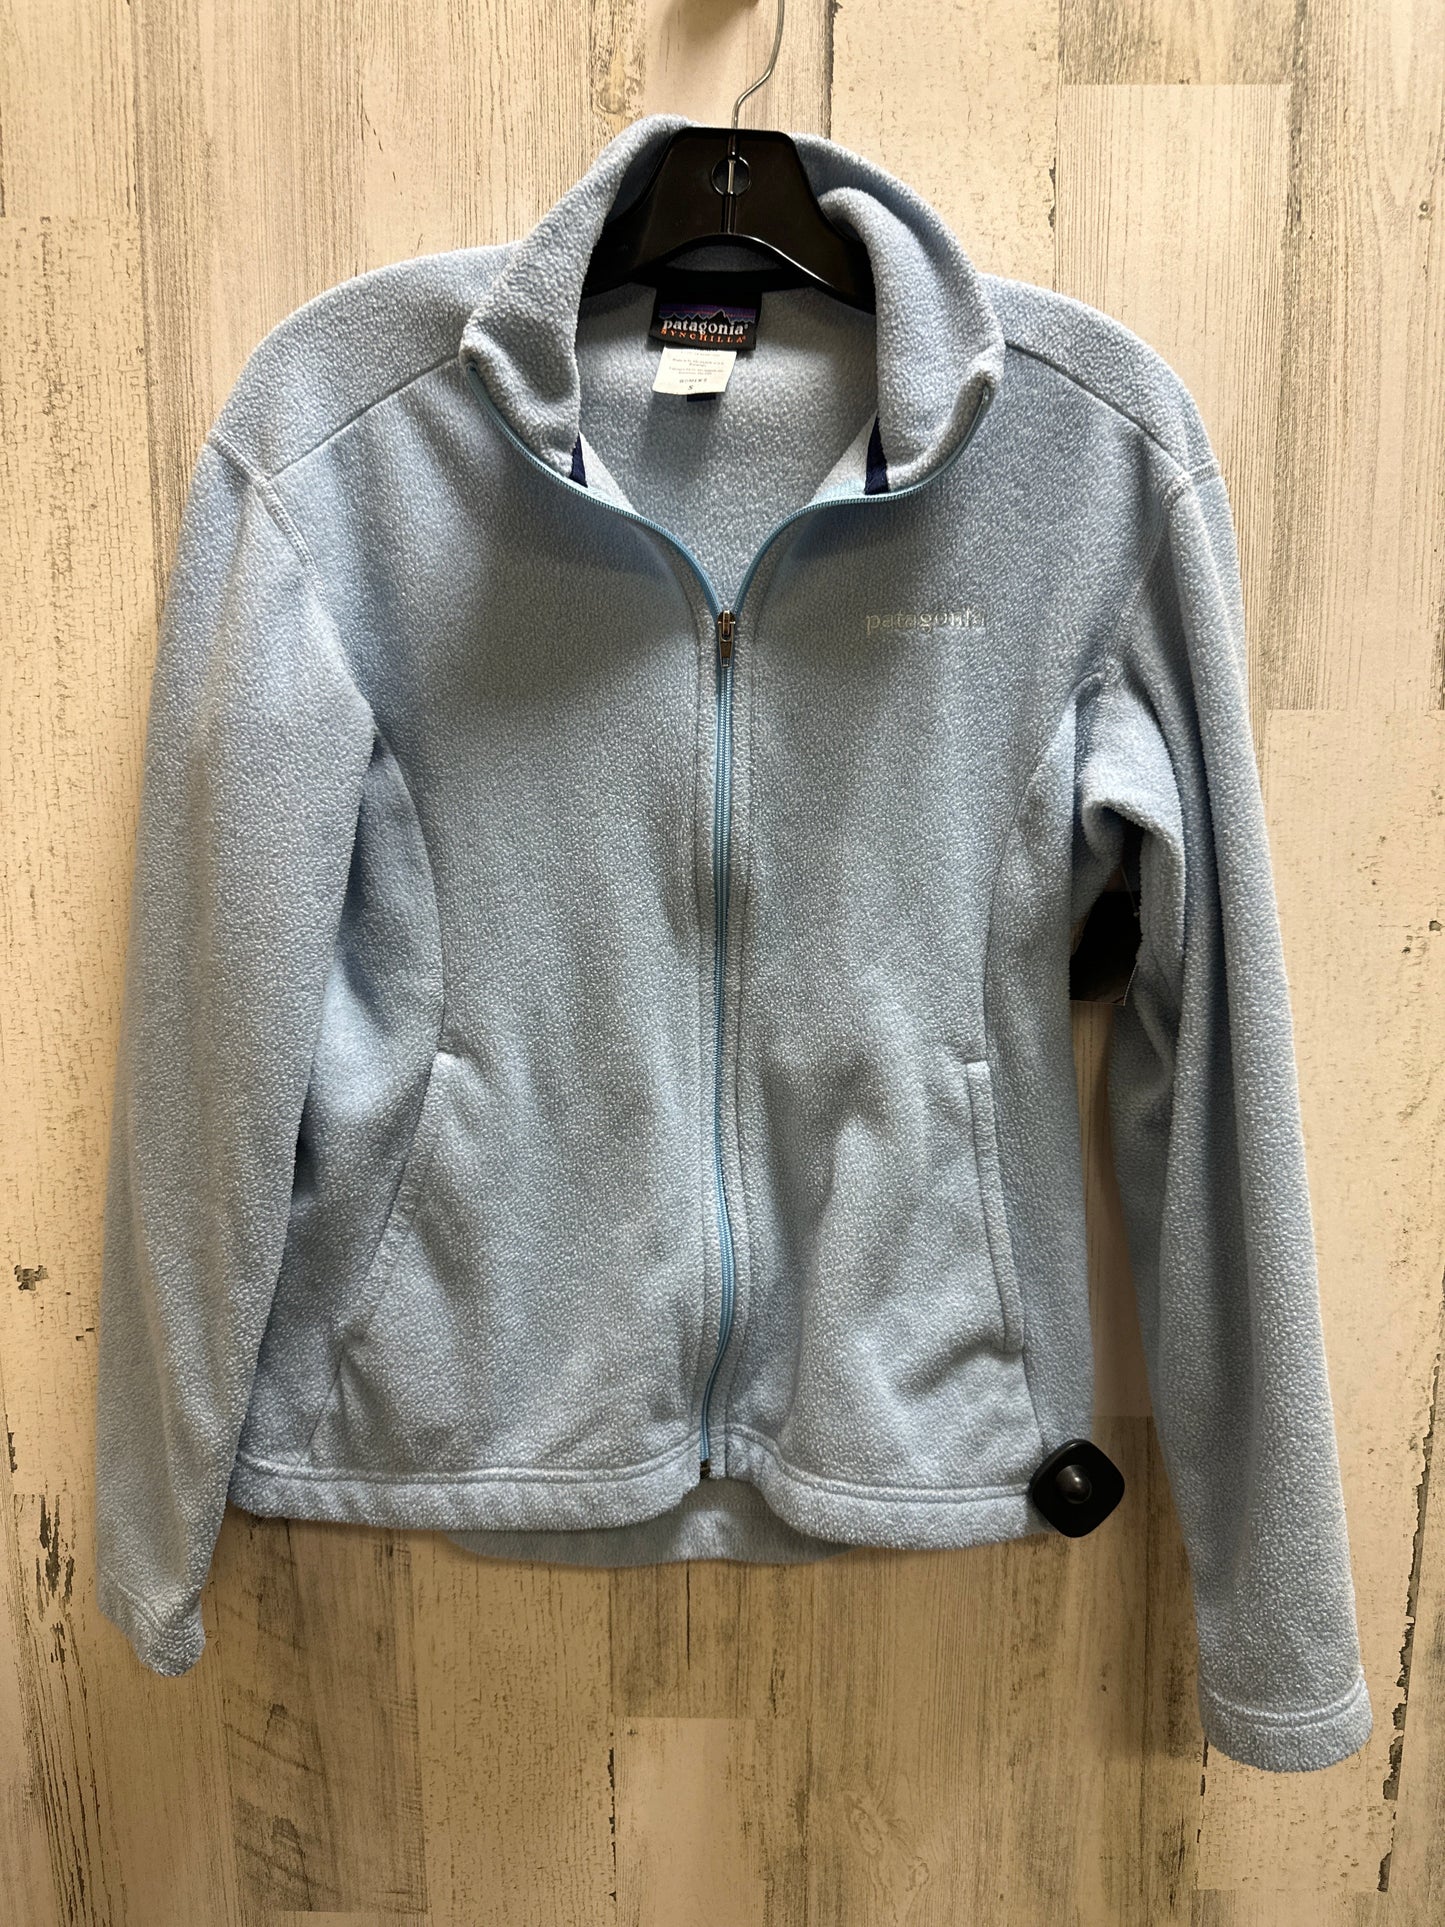 Blue Sweater Patagonia, Size S